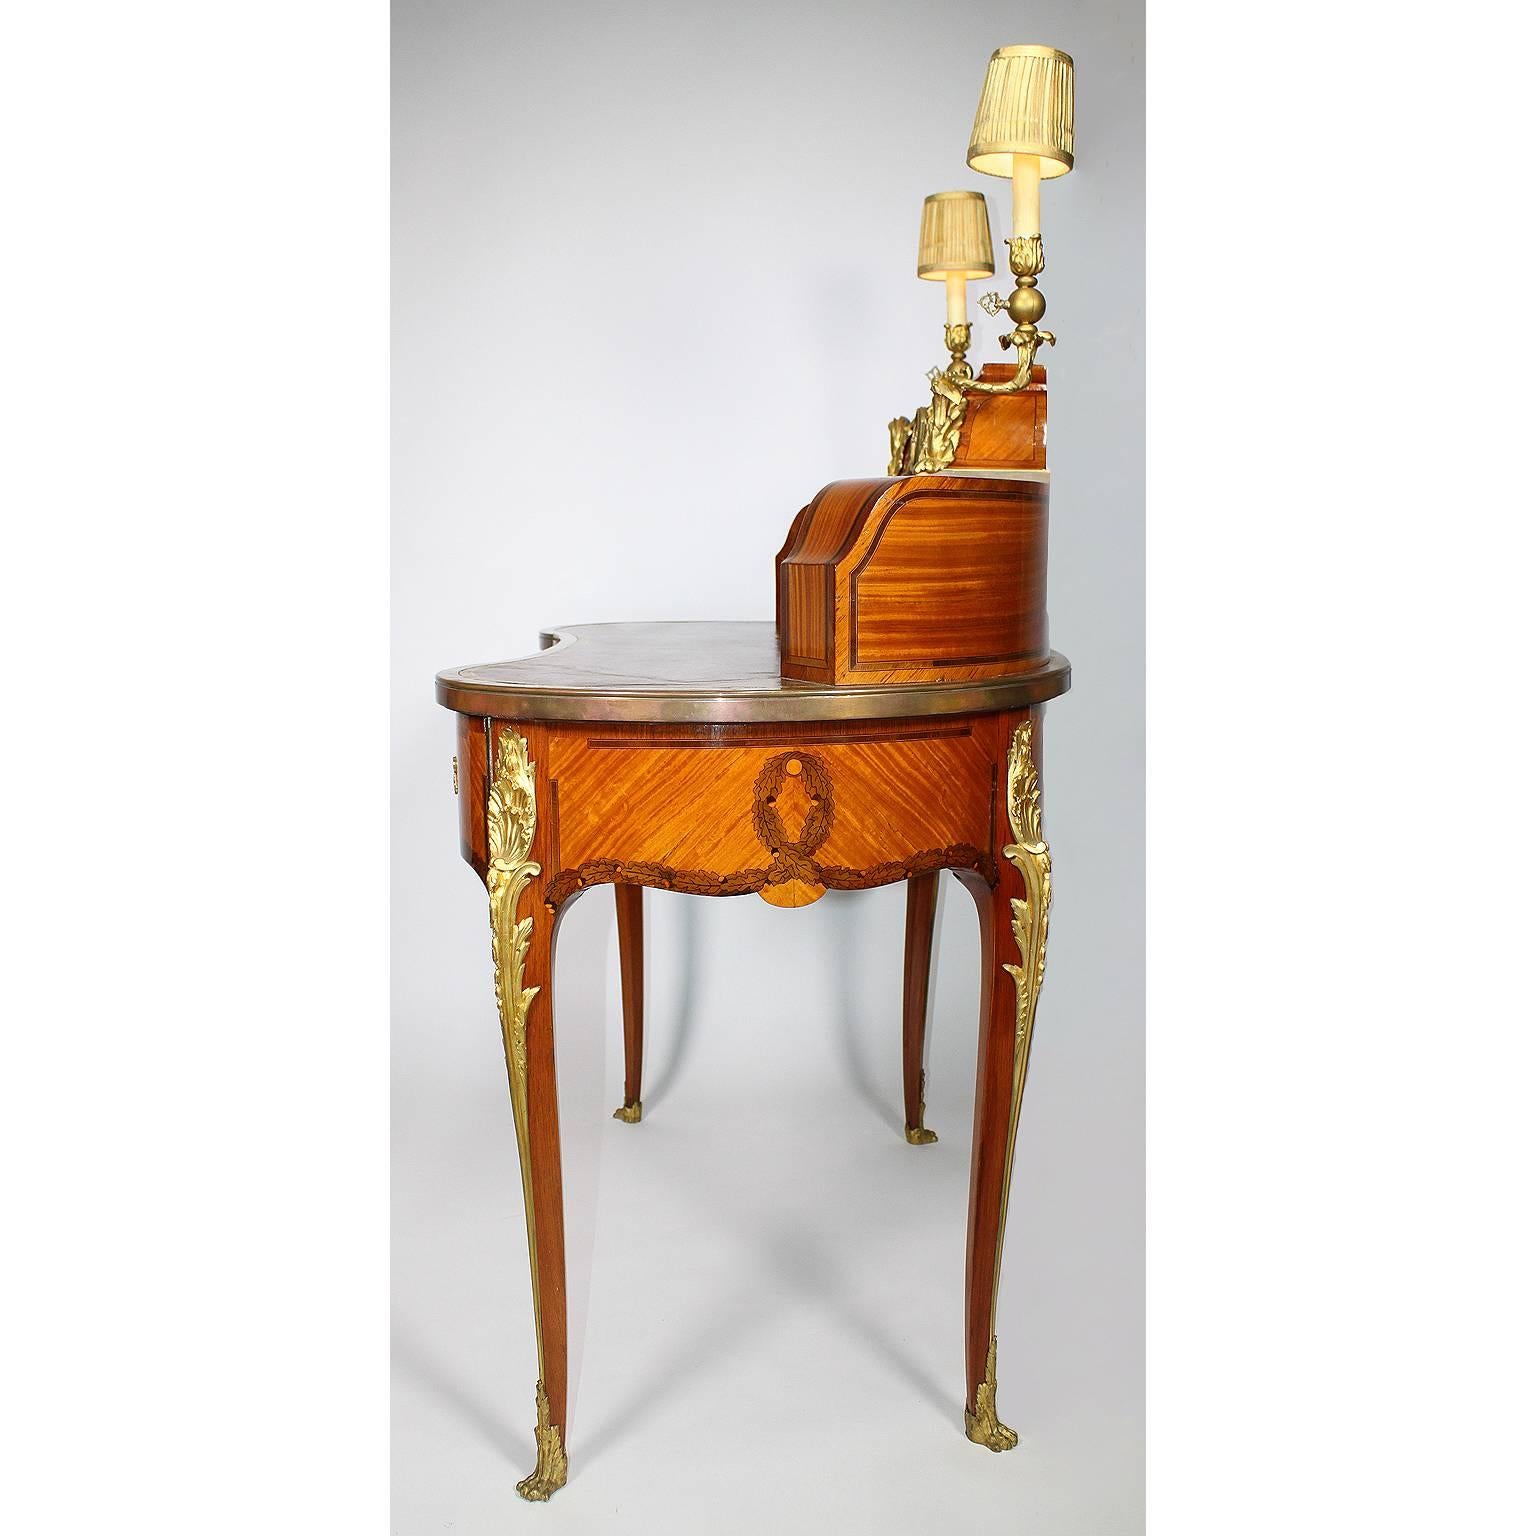 Fine French 19th Century Louis XV Style Tulipwood and Ormolu-Mounted Ladies Desk For Sale 5